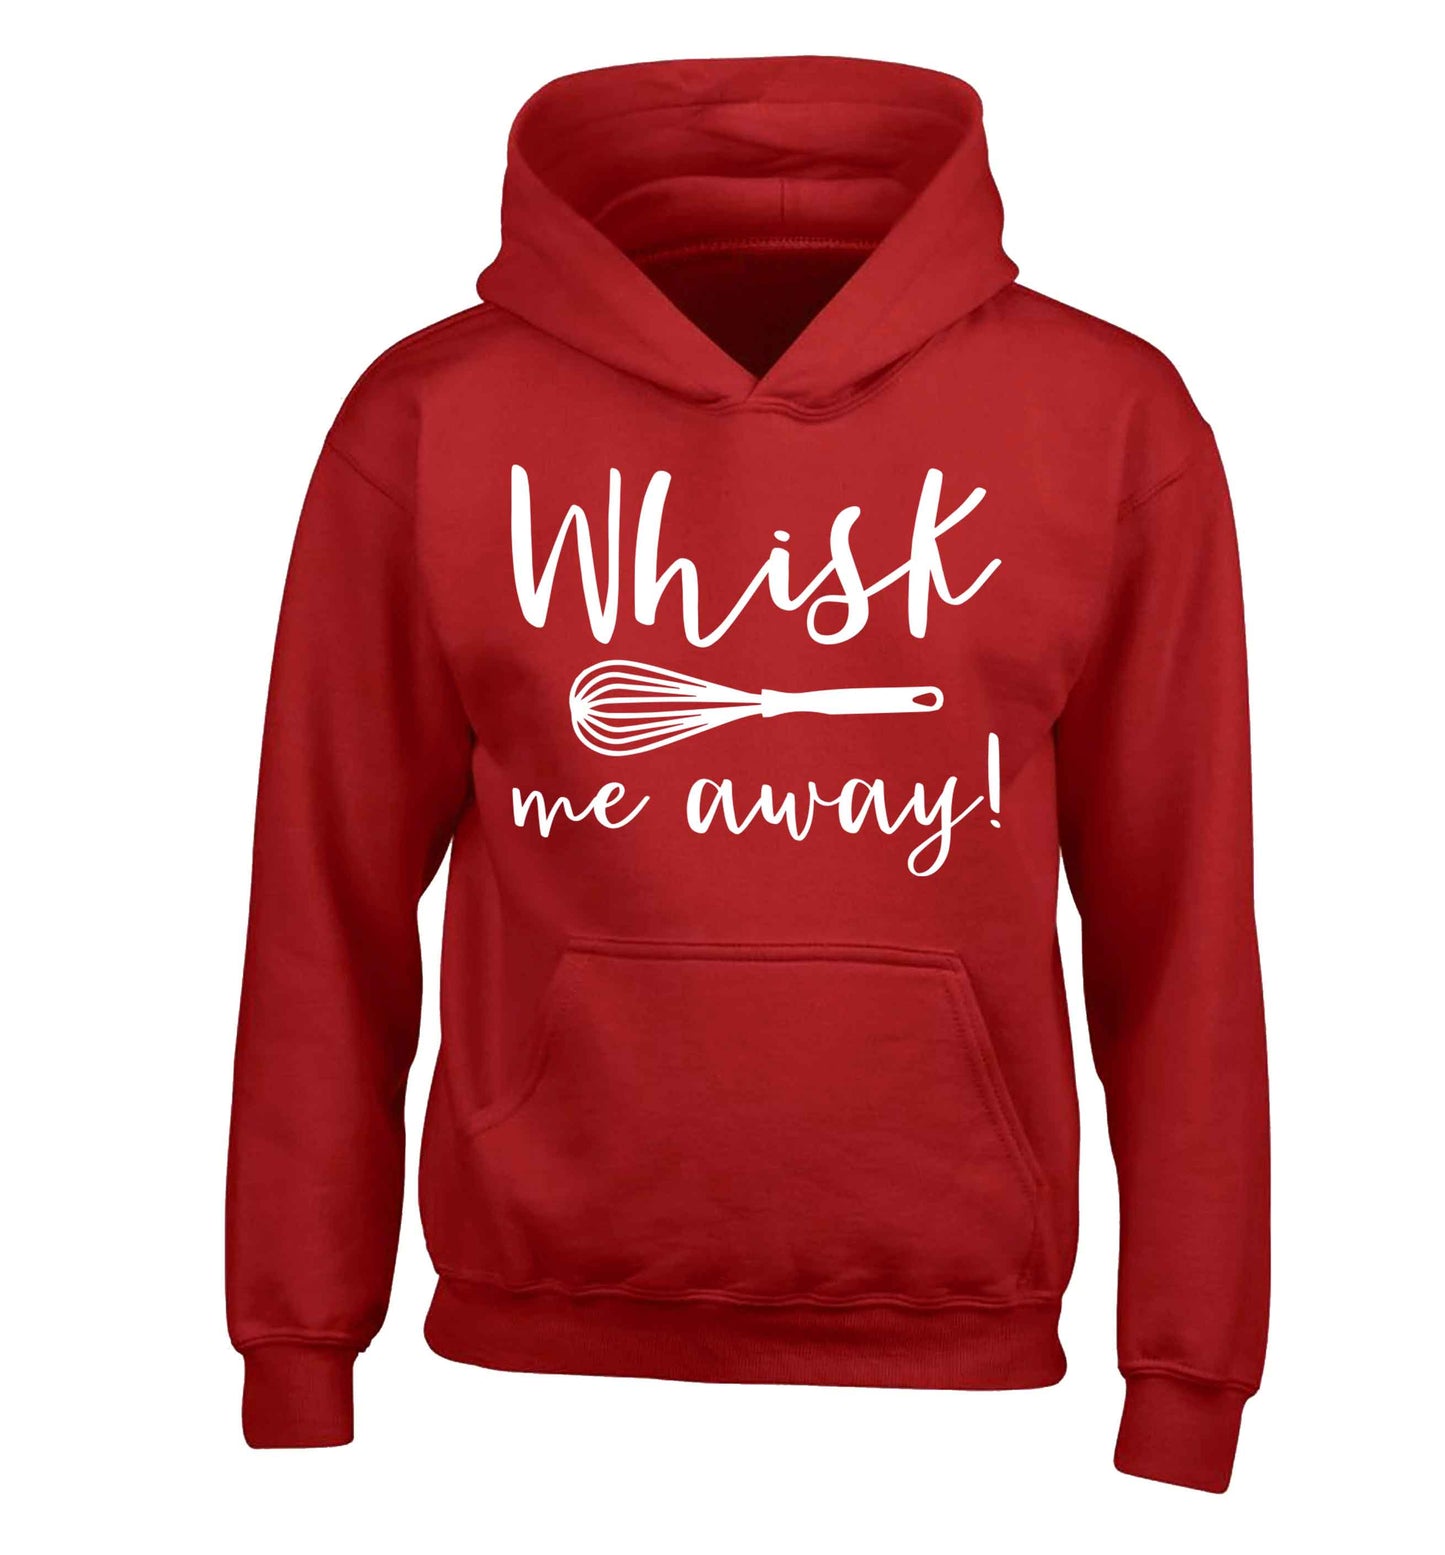 Whisk me away children's red hoodie 12-13 Years